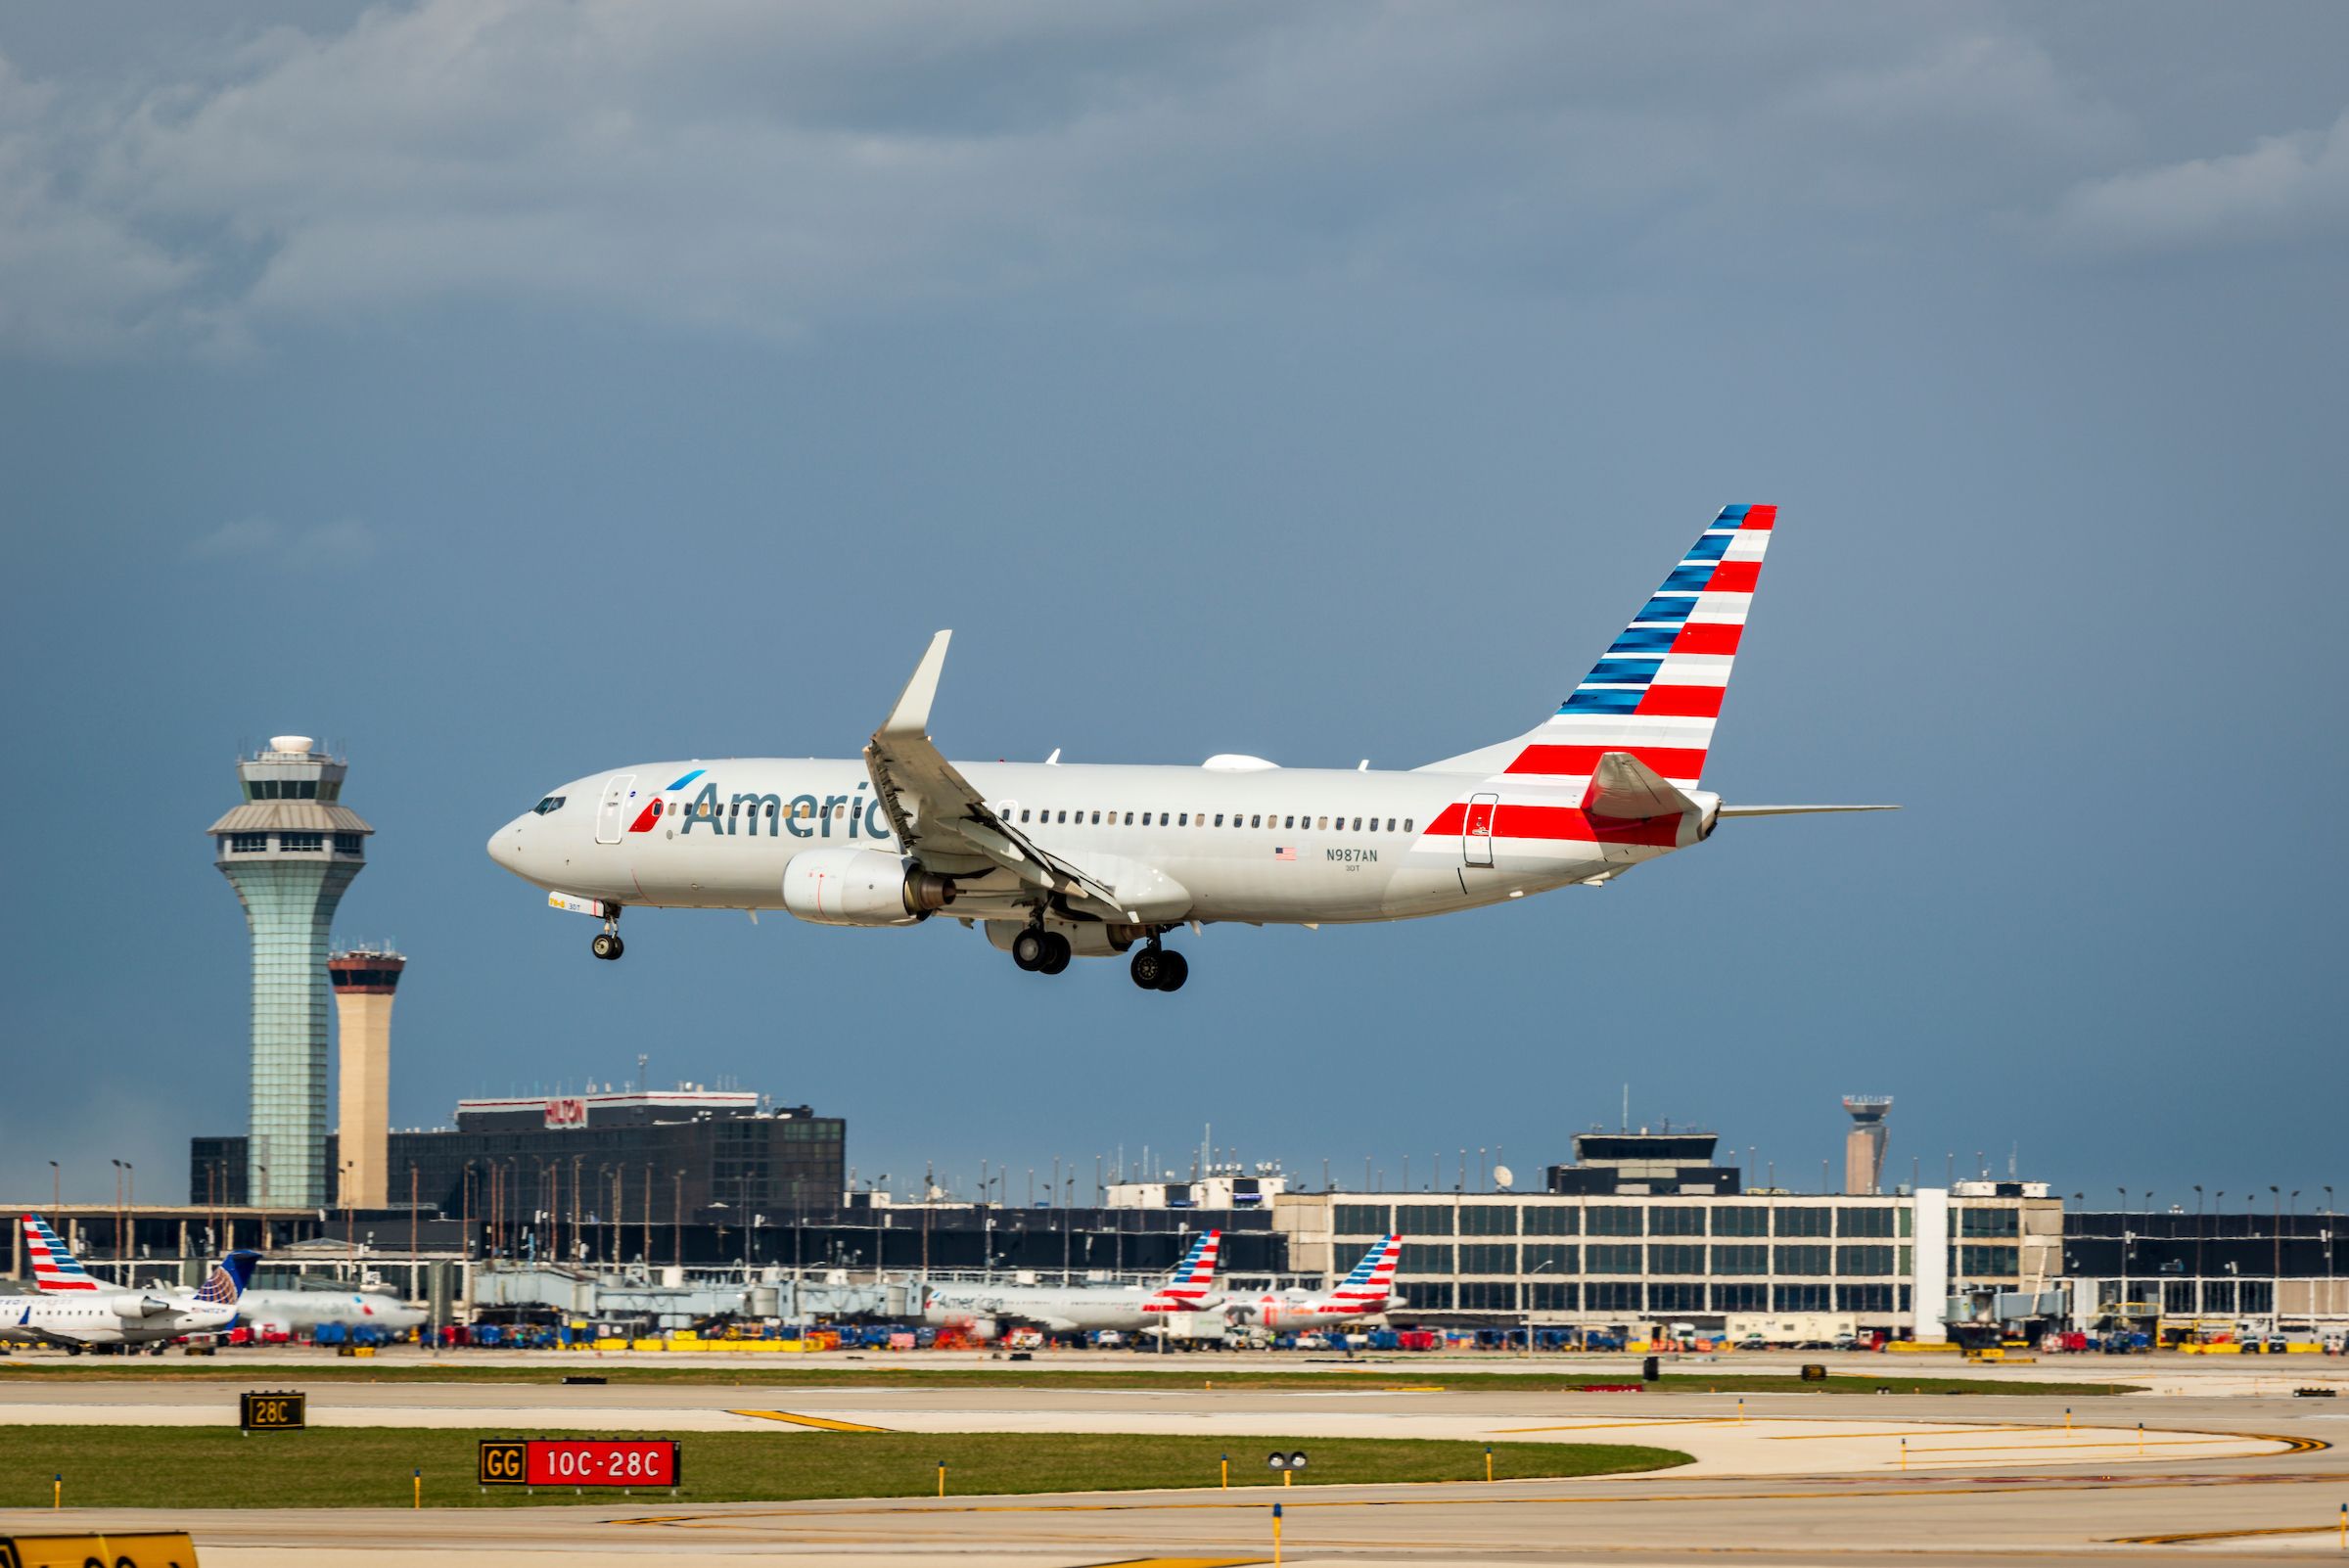 An American Airlines plane lands at Chicago O'Hare International Airport (ORD)